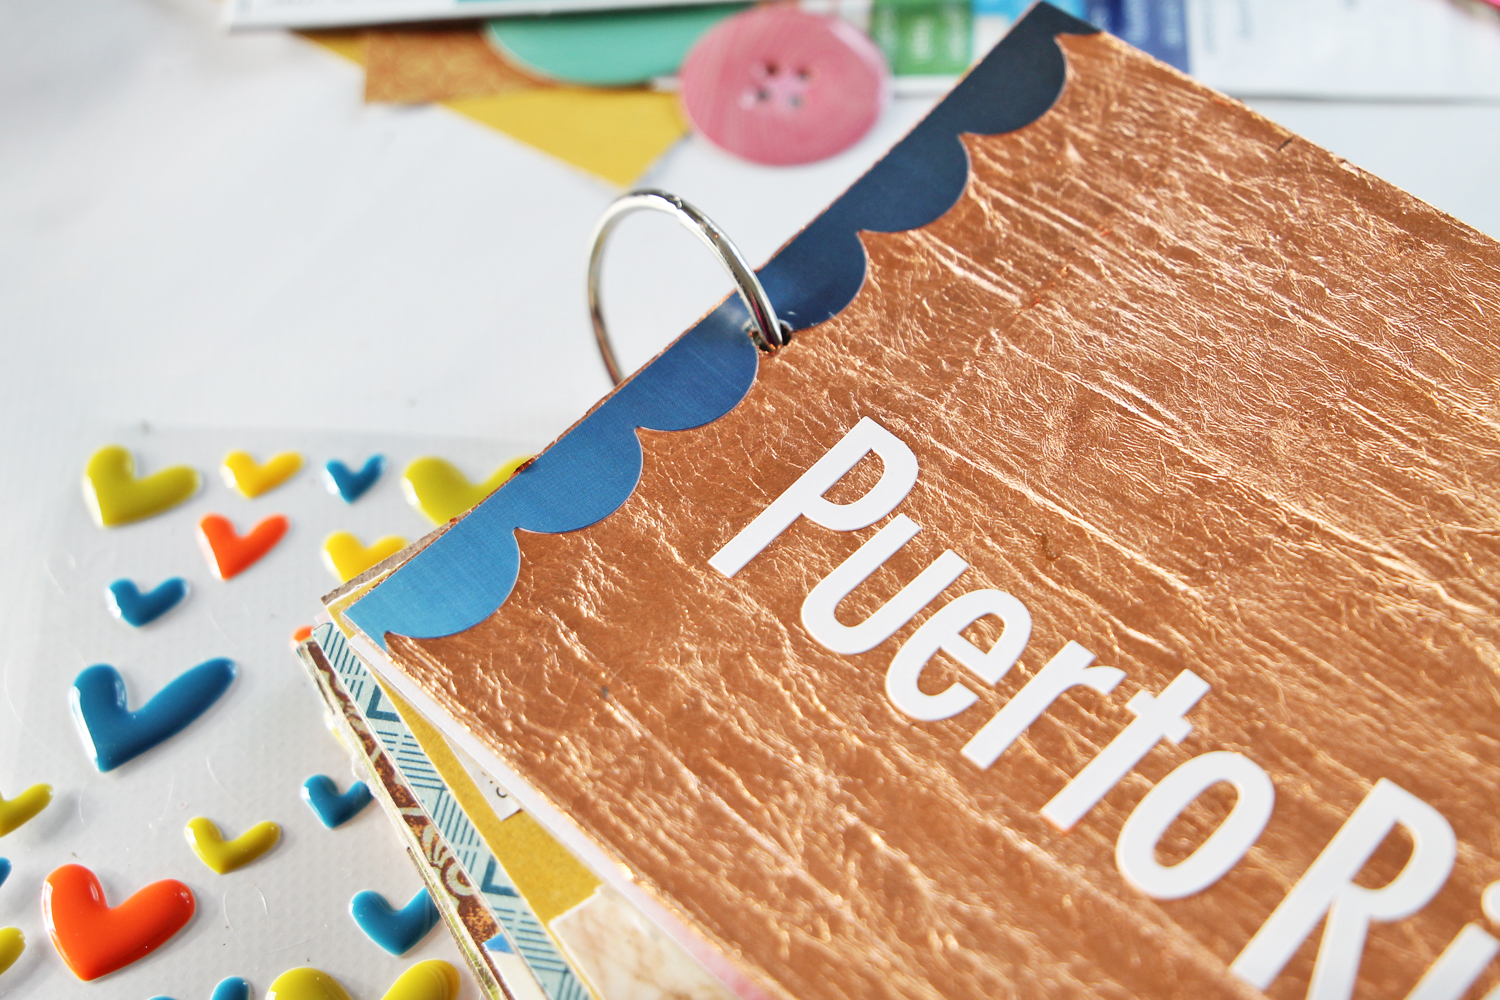 Learn how to add gold foiling to your crafts using @tombowusa MONO Multi Liquid Glue following this tutorial by @studiokatie #tombowusa #tombow #goldfoiling #diy